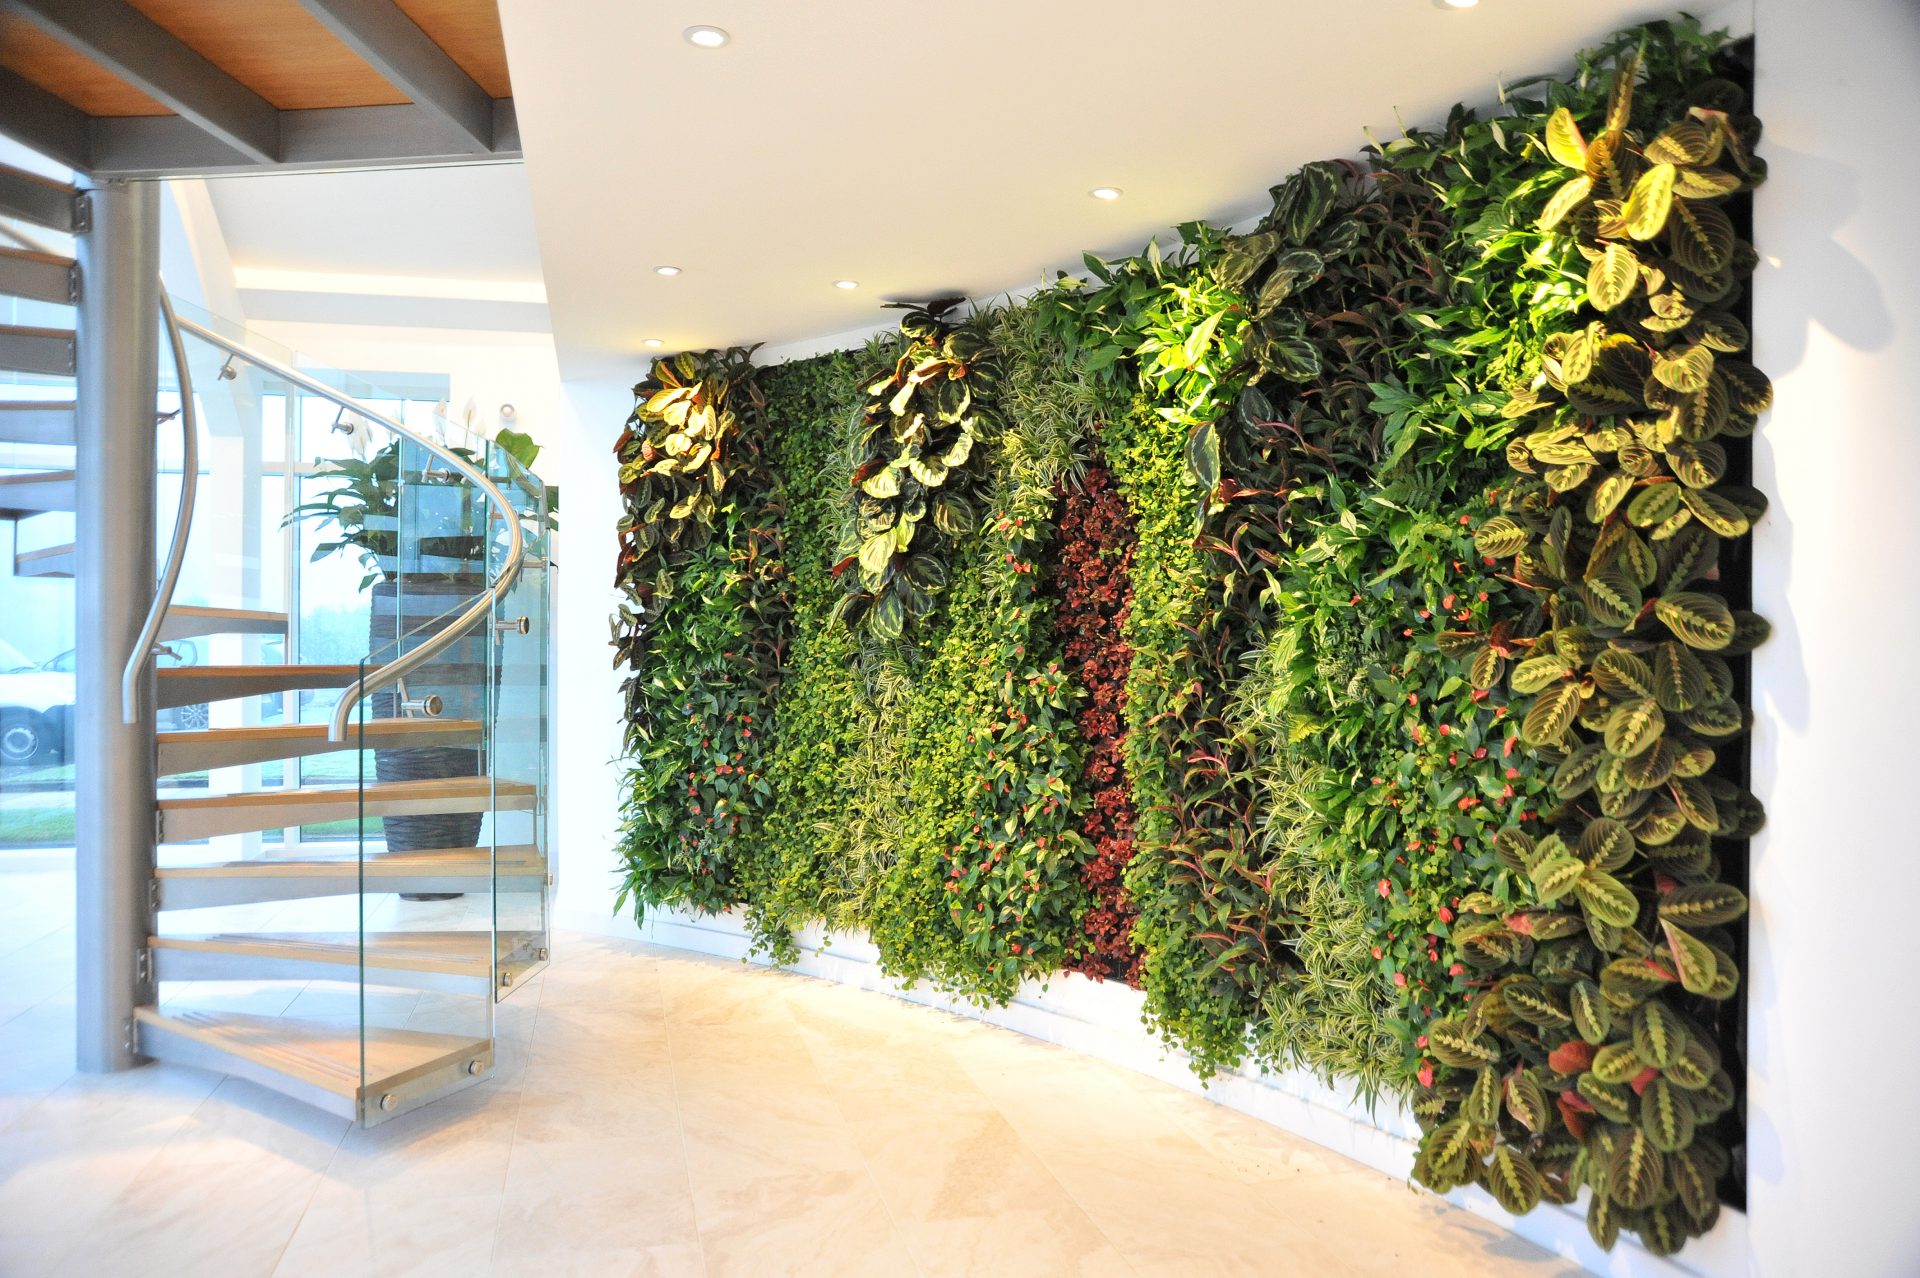 Living Walls The Interior Design Trend That Makes You Happier Healthier  And Yes Even Smarter  Urbanstrong